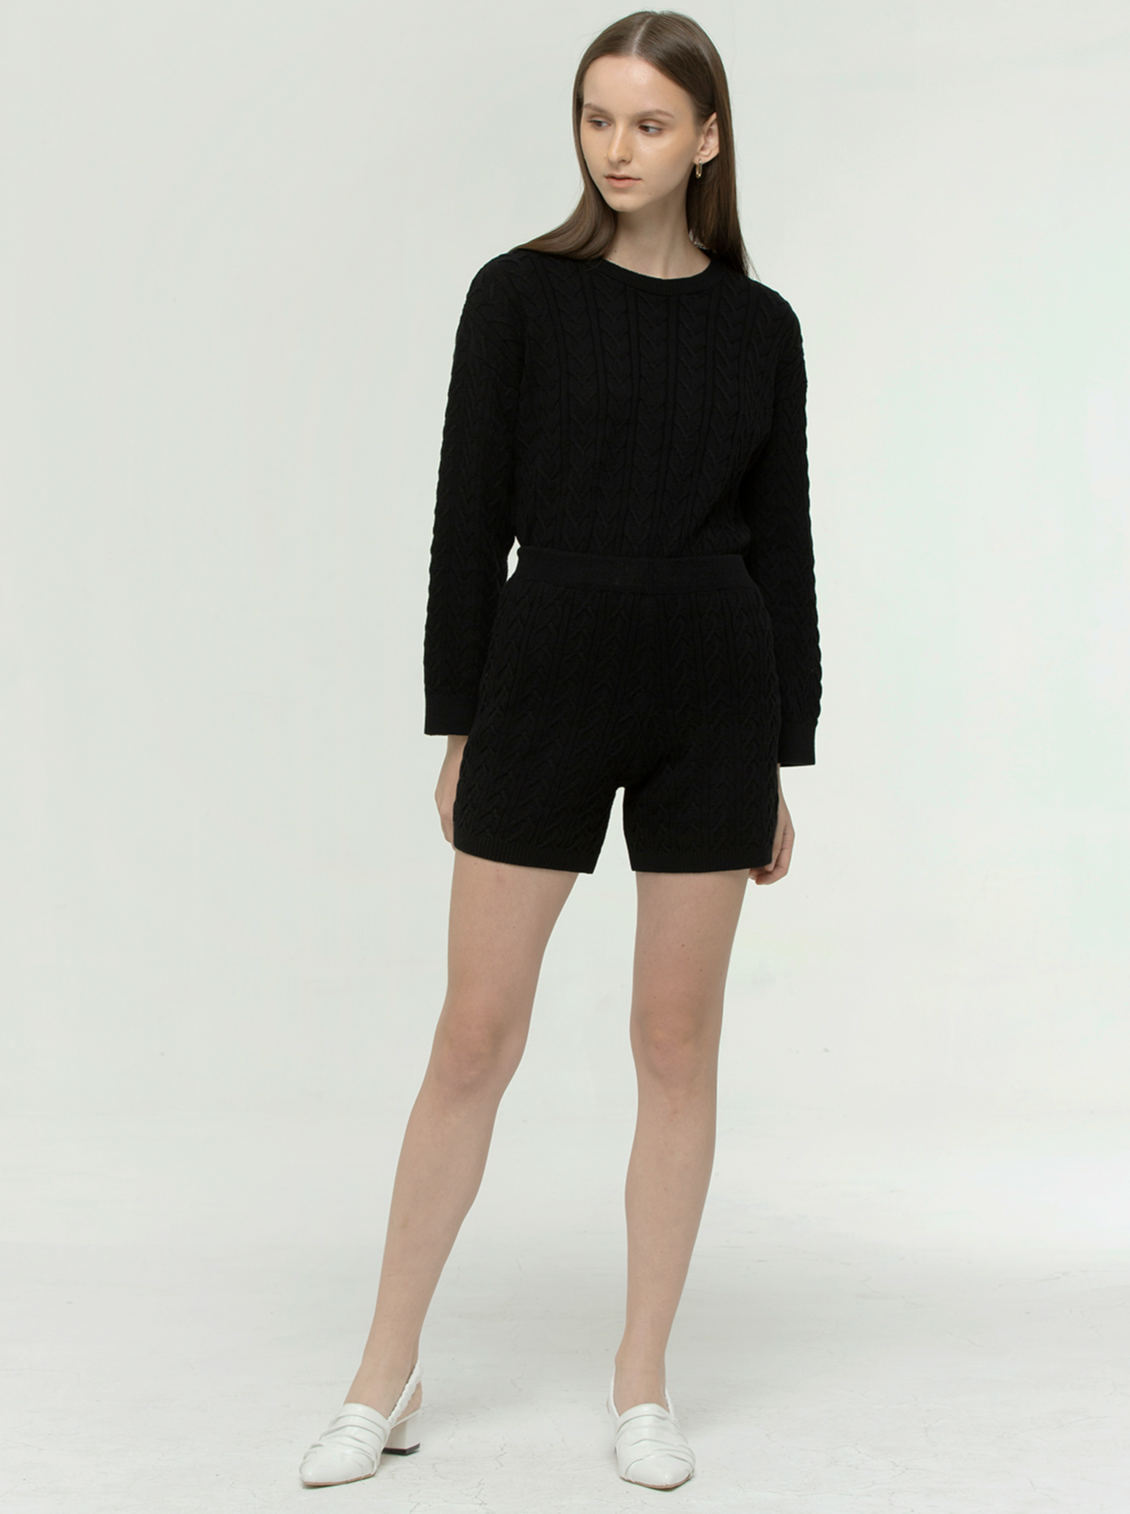 Black Cable Knit Shorts